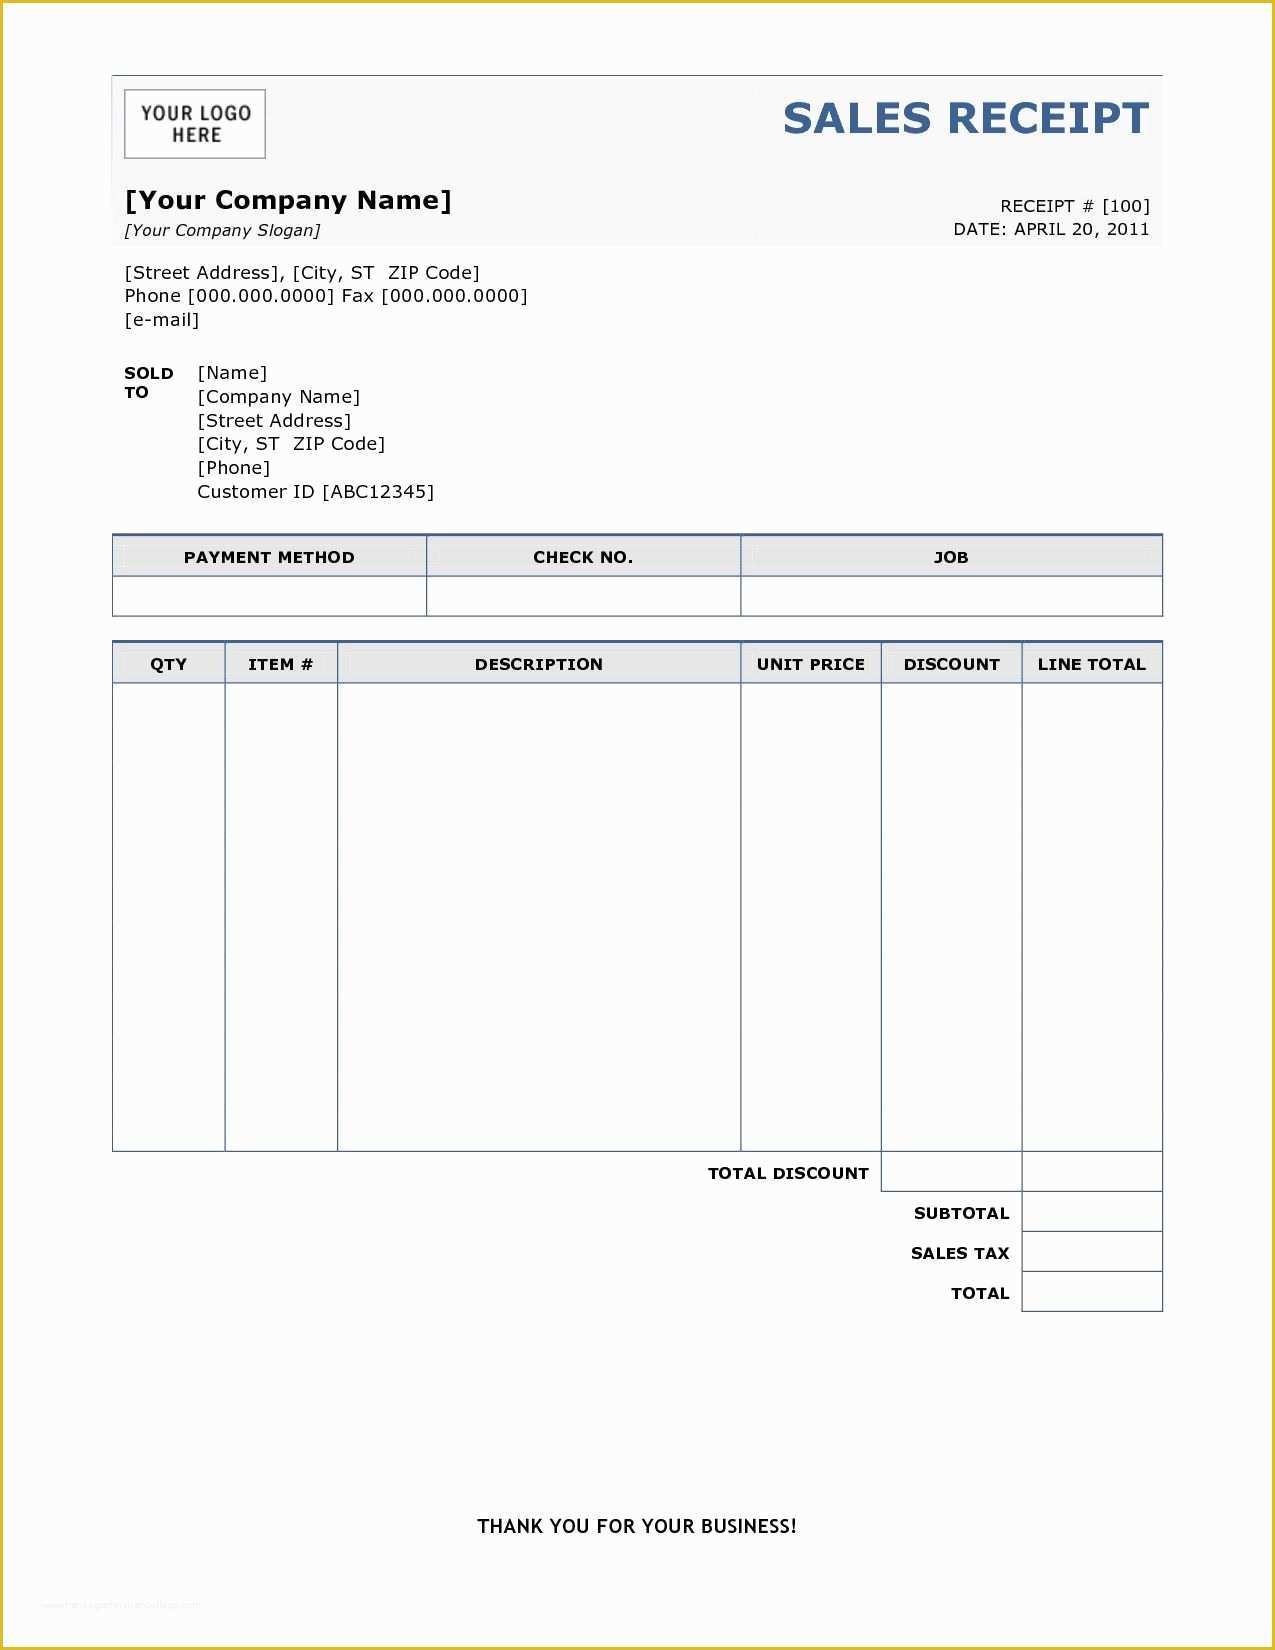 Free Basic Invoice Template Word Of Sample Of Invoice Receipt Free Printable Invoice Sample Of